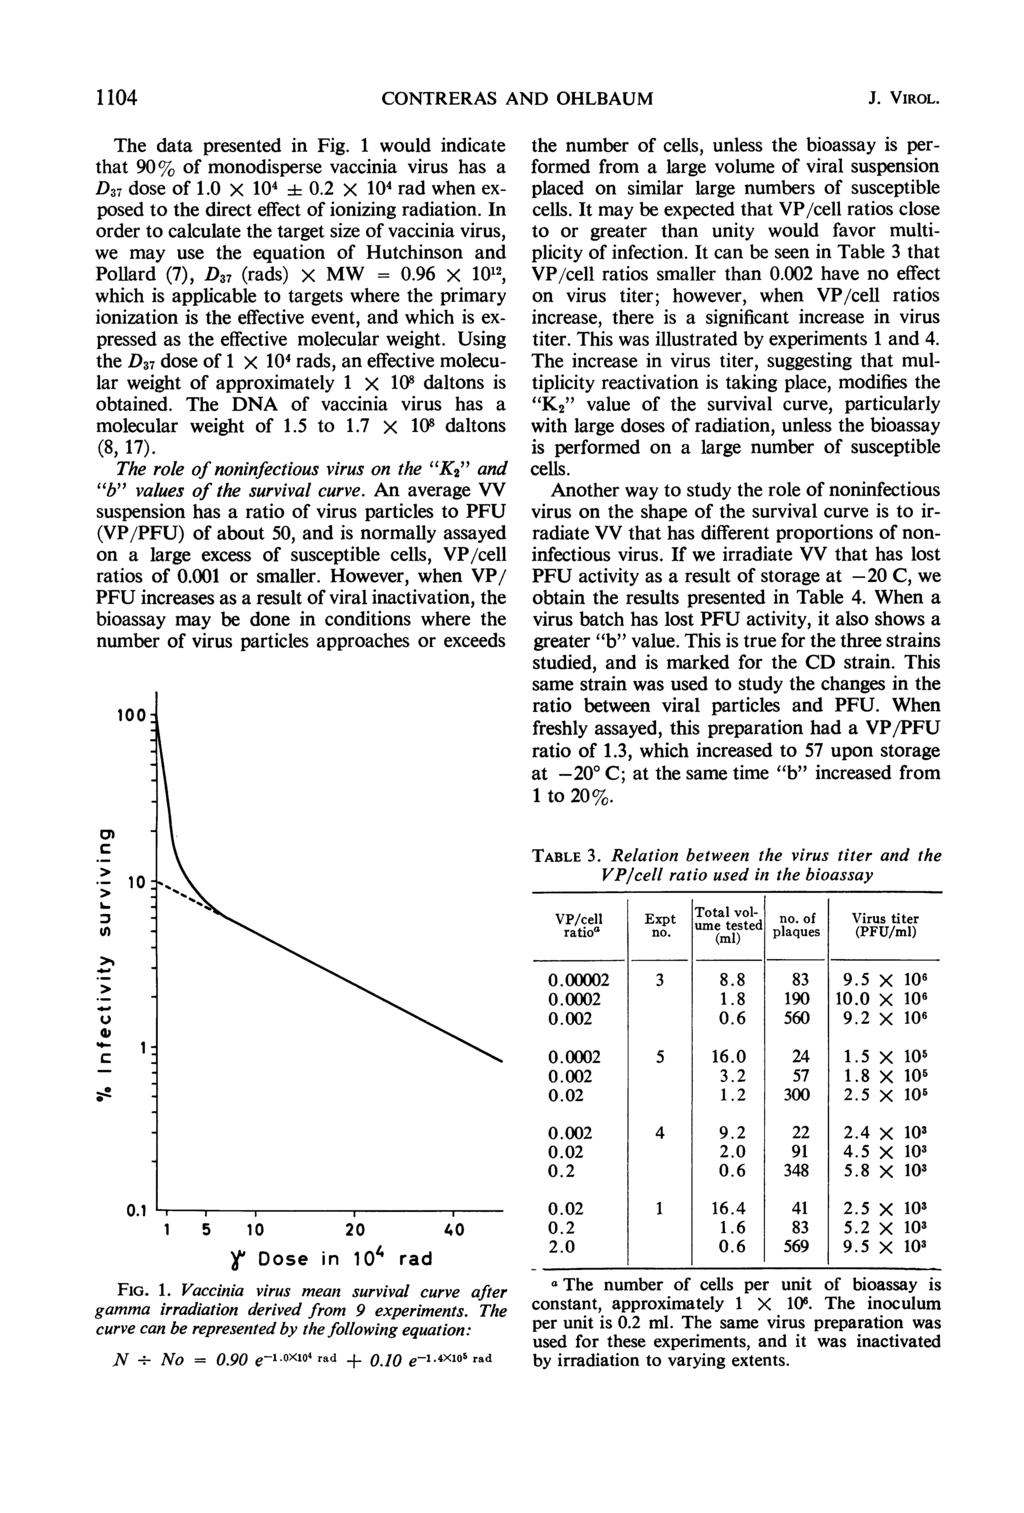 1104 CONTRERAS AND OHLBAUM J. VIROL. The data presented in Fig. 1 would indicate that 90% of monodisperse vaccinia virus has a D37 dose of 1.0 X 104 i 0.